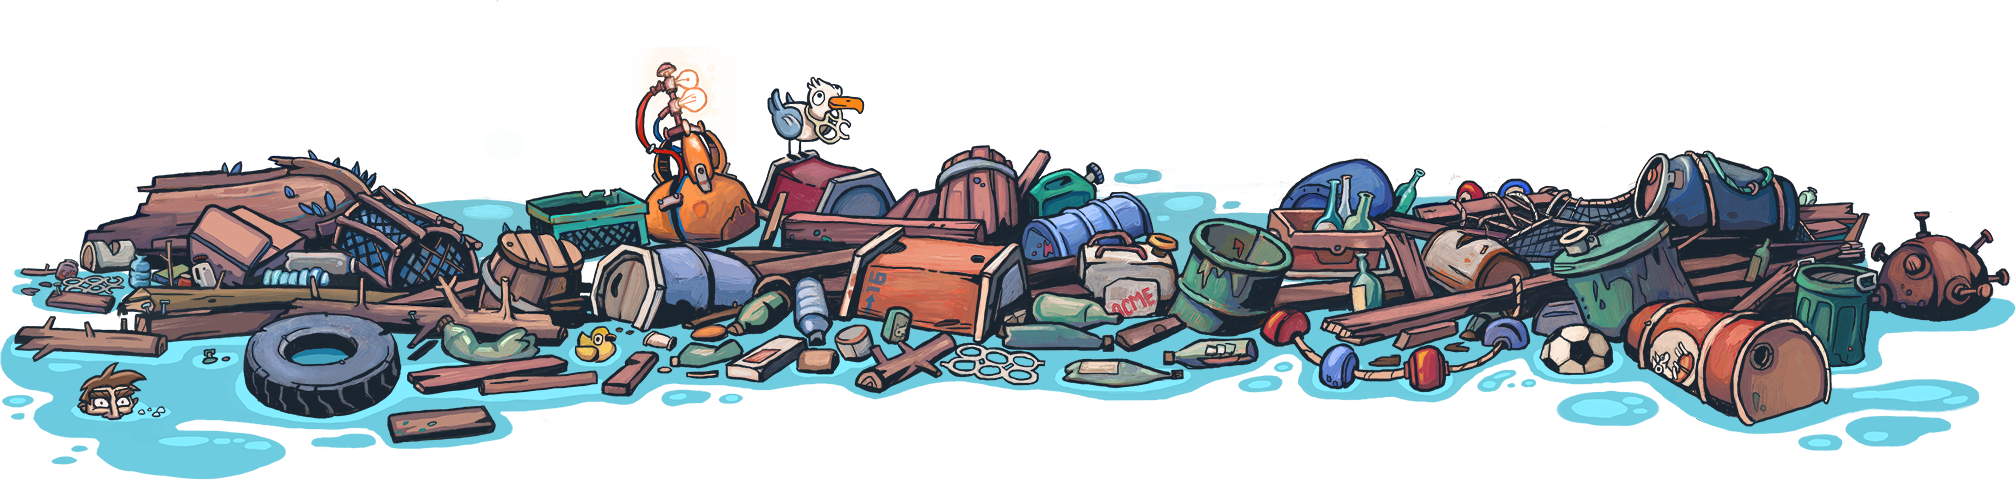 Download Garbage Free Clipart HD HQ PNG Image | FreePNGImg